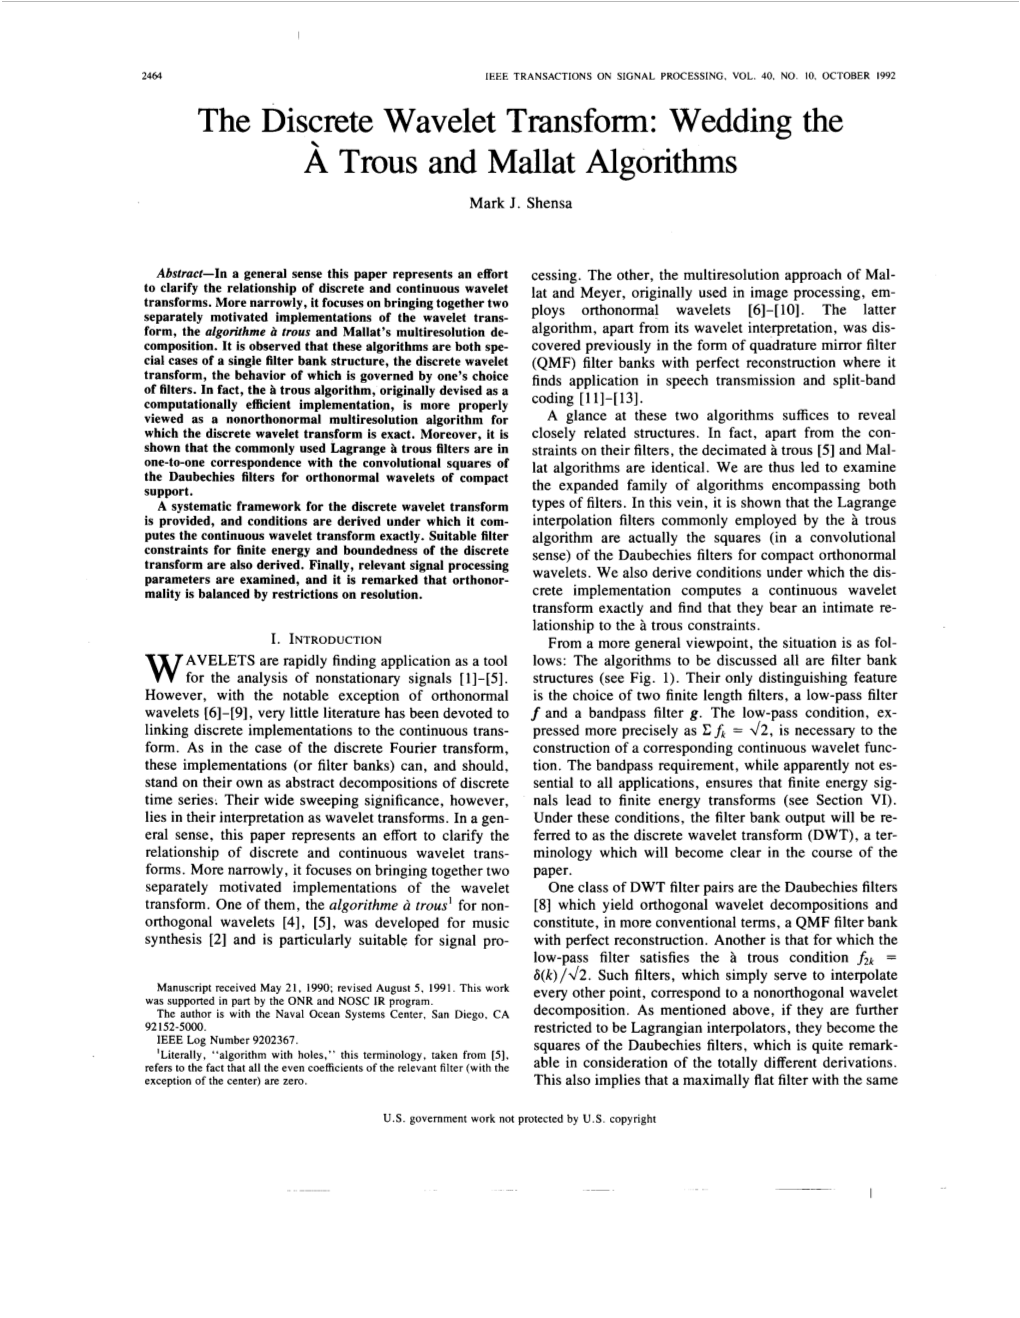 The Discrete Wavelet Transform: Wedding the a Trous and Mallat